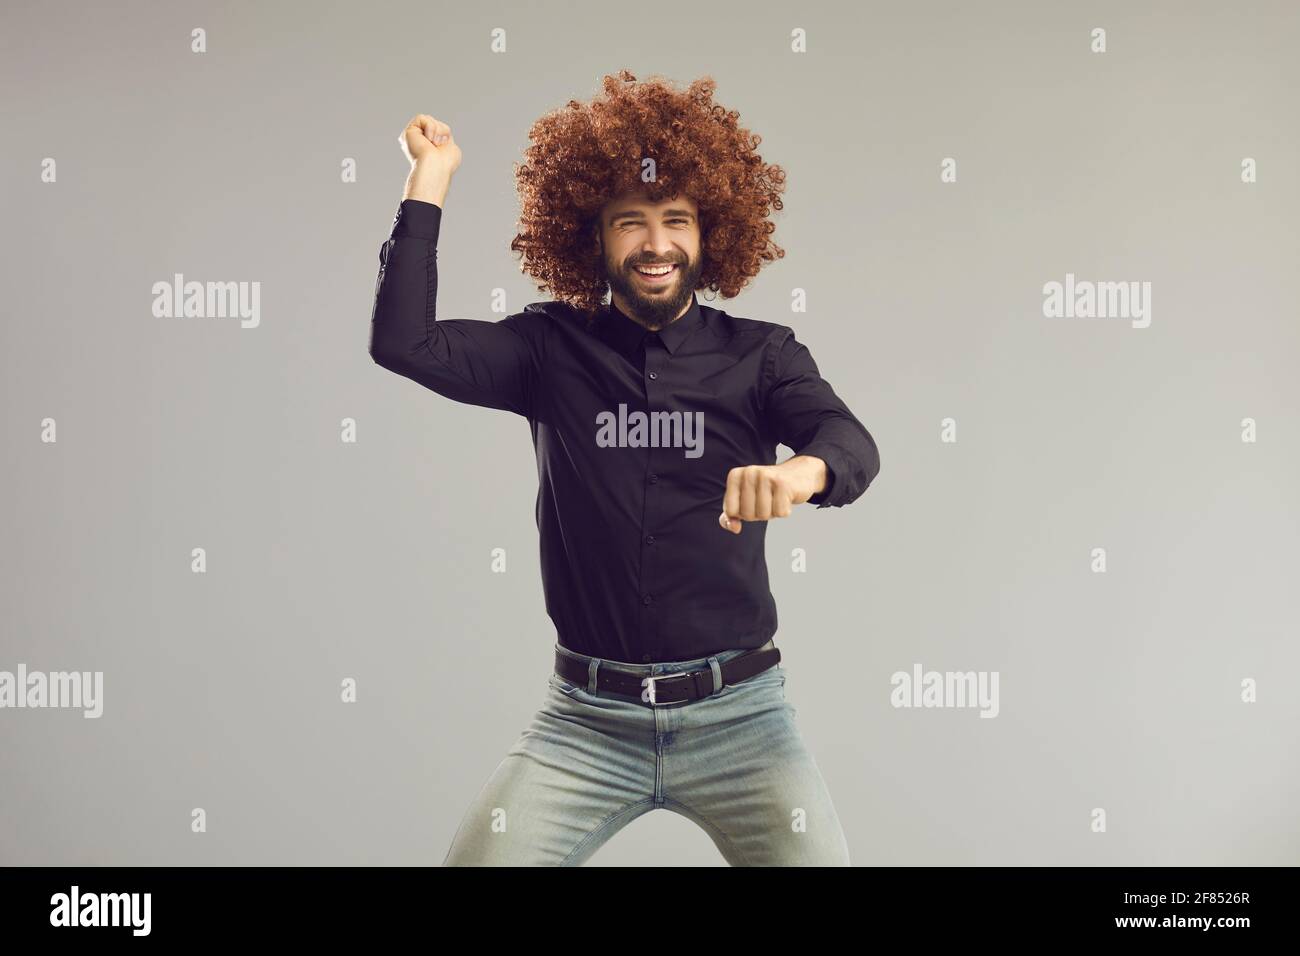 Happy guy with crazy funny curly hair dancing gangnam style on gray studio background Stock Photo